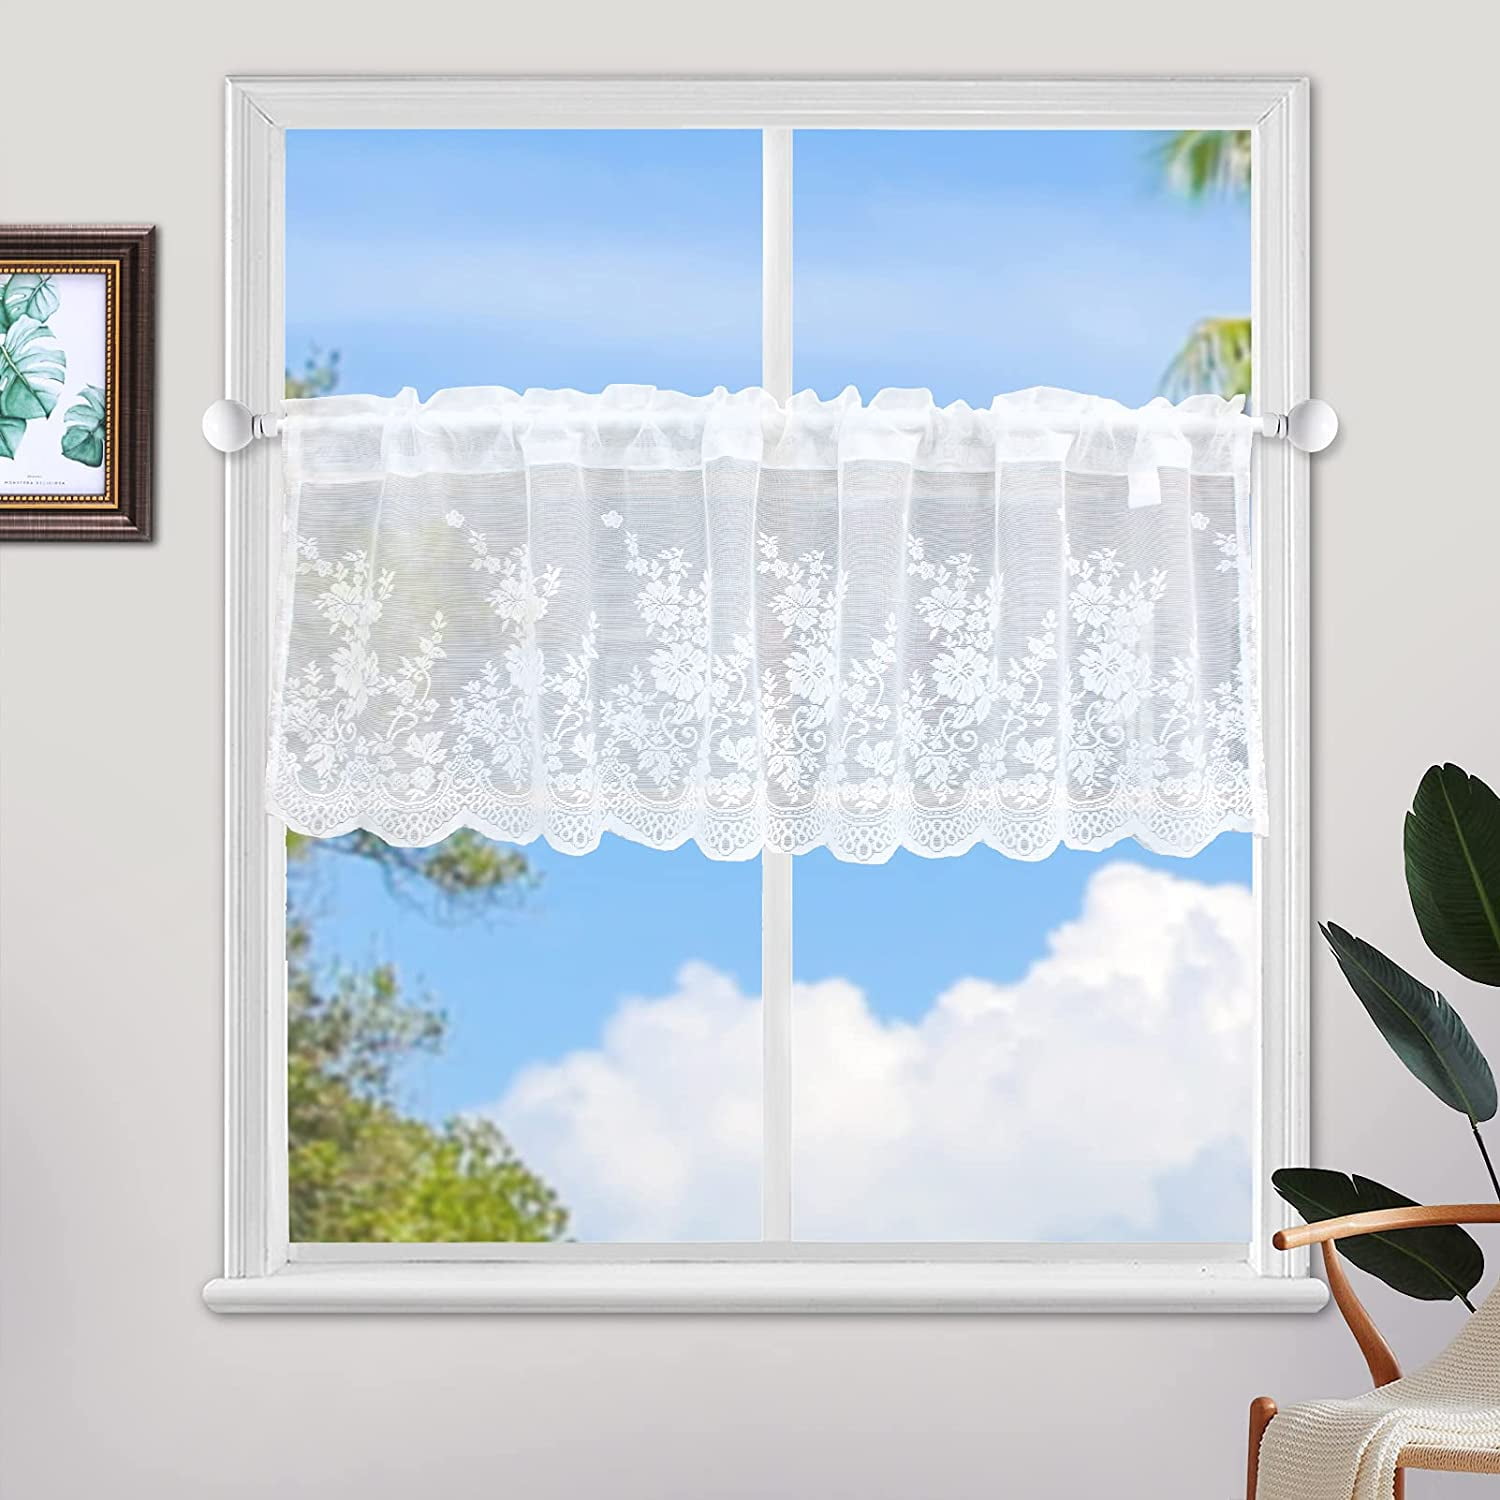 by ZHH Country Style White Polyester Valance Floral Embroidery Sheer Lace Cafe Curtain W 59 Inch x H 18 Inch Patterns of Leaves and Flowers